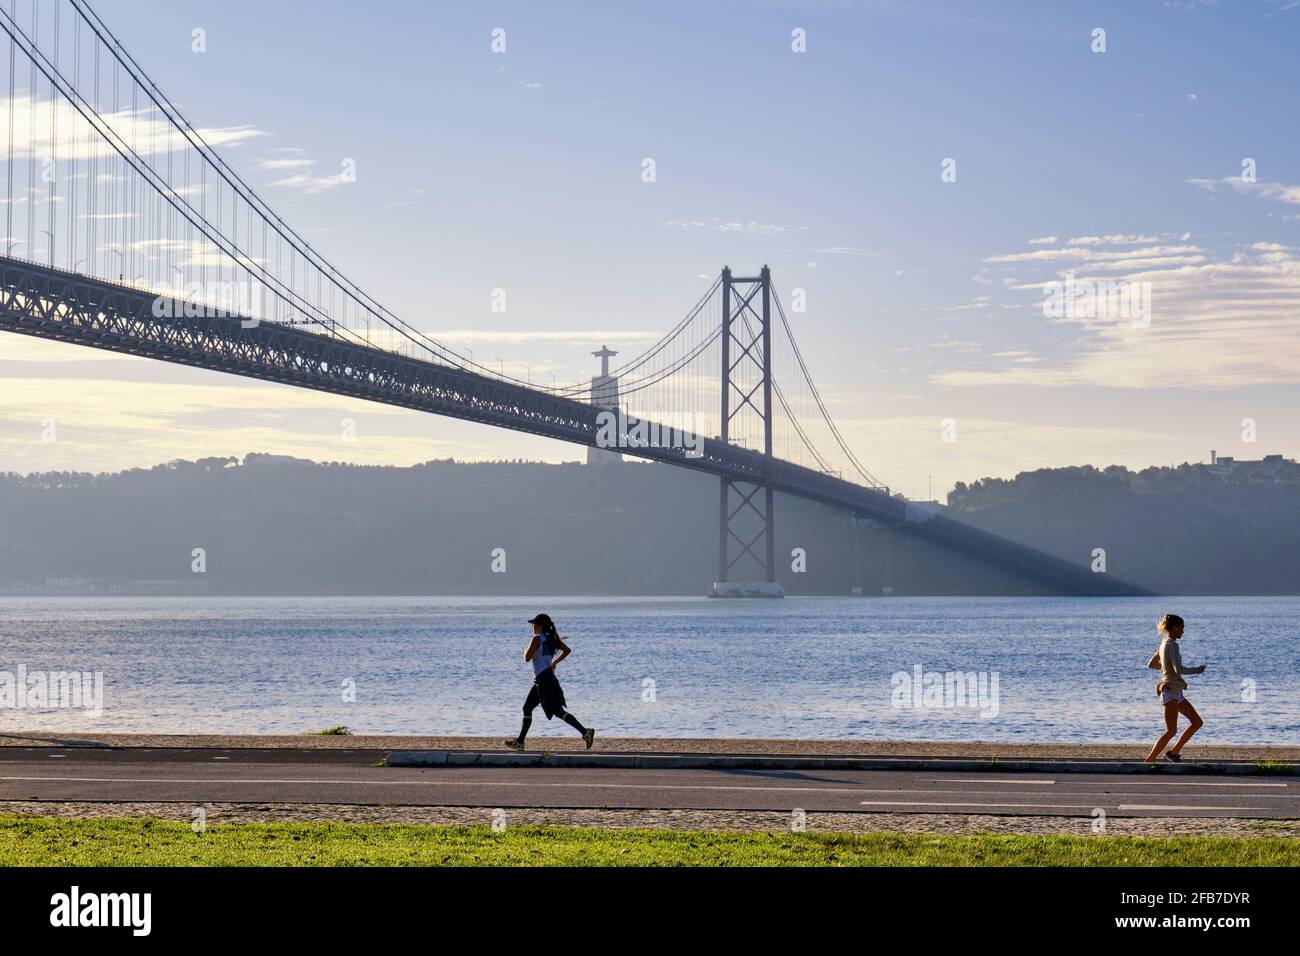 Dawn on the banks of the Tagus river, near the 25th of April bridge. Lisbon, Portugal Stock Photo